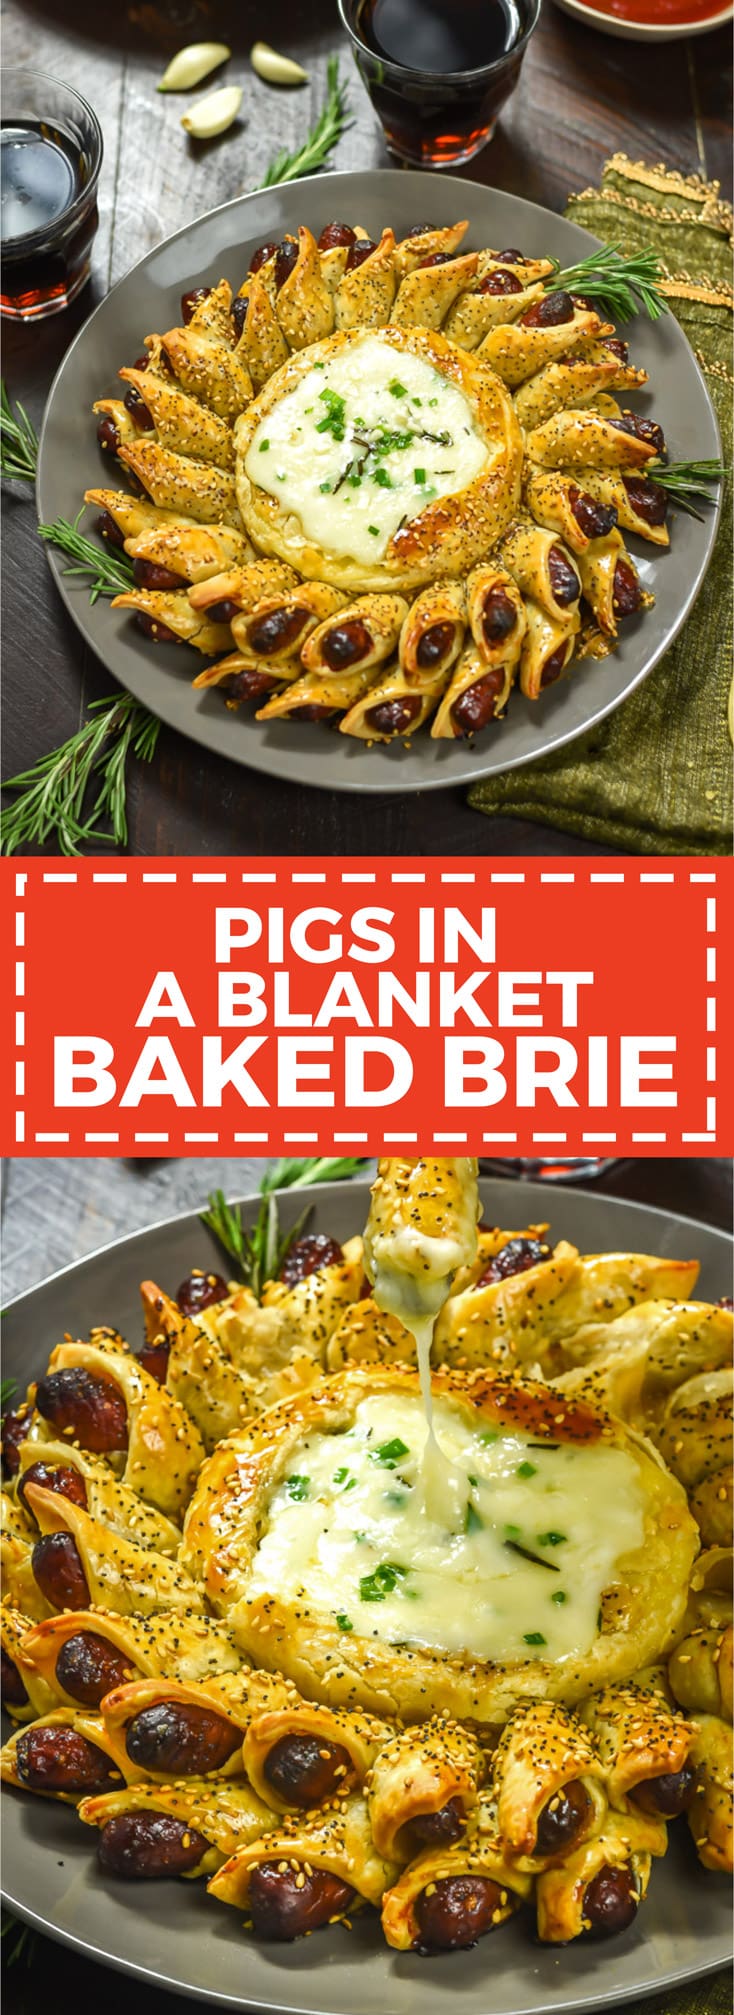 Pigs in a Blanket Baked Brie. This cheesy, garlicky, herby dip includes mini cocktail sausages in a premade pie crust! It's an easy and delicious party treat!| hostthetoast.com